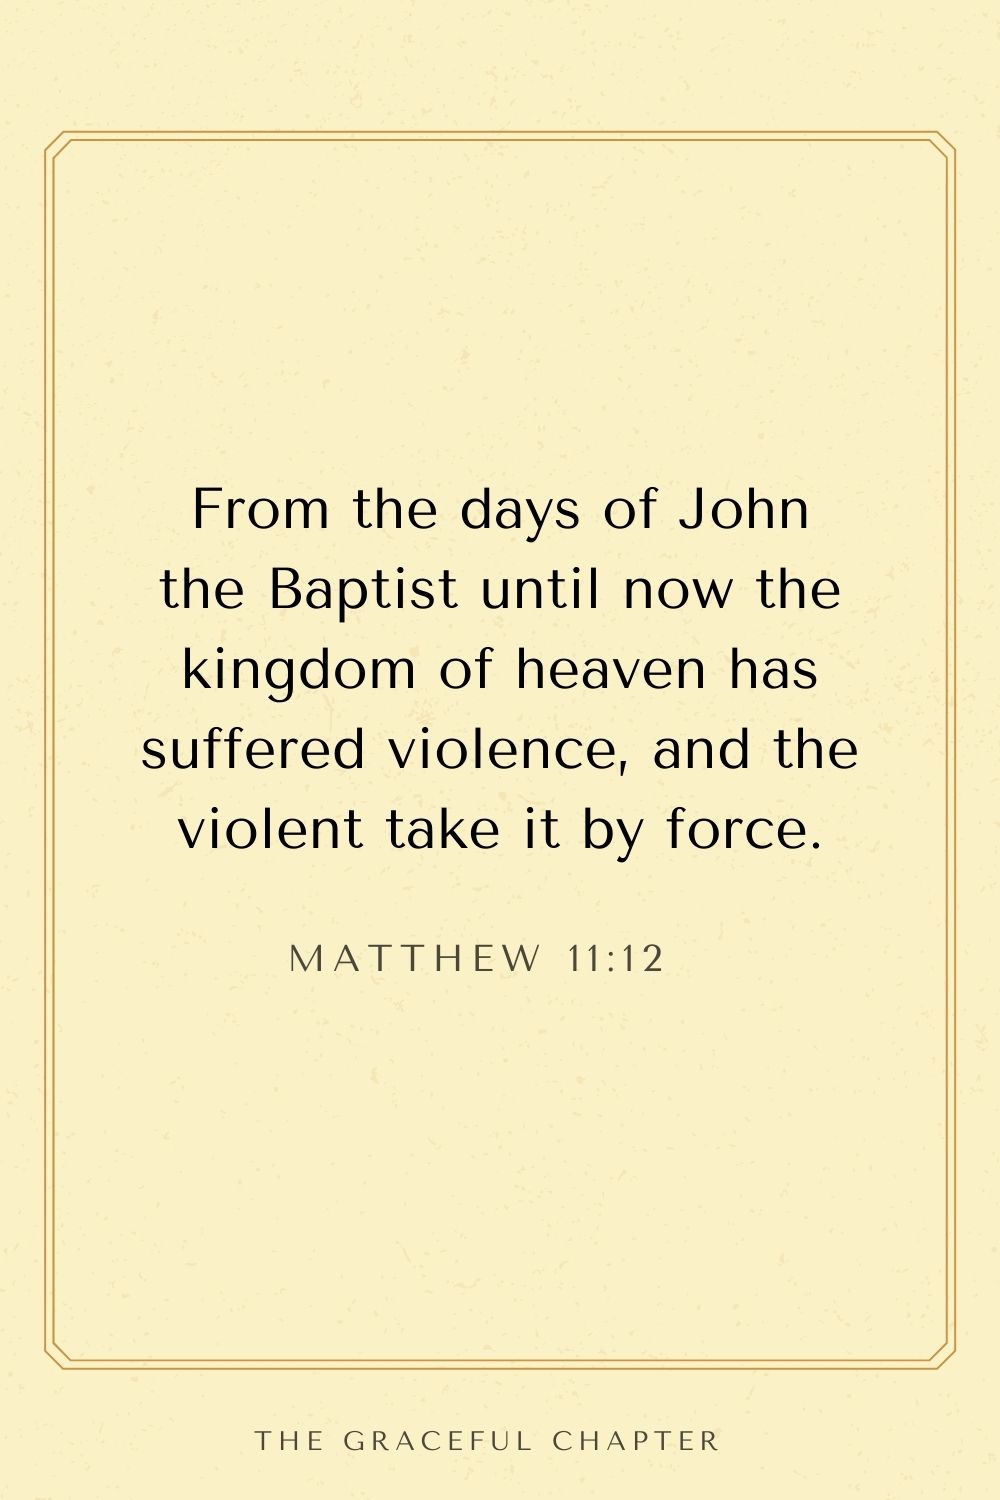 From the days of John the Baptist until now the kingdom of heaven has suffered violence, and the violent take it by force. Matthew 11:12